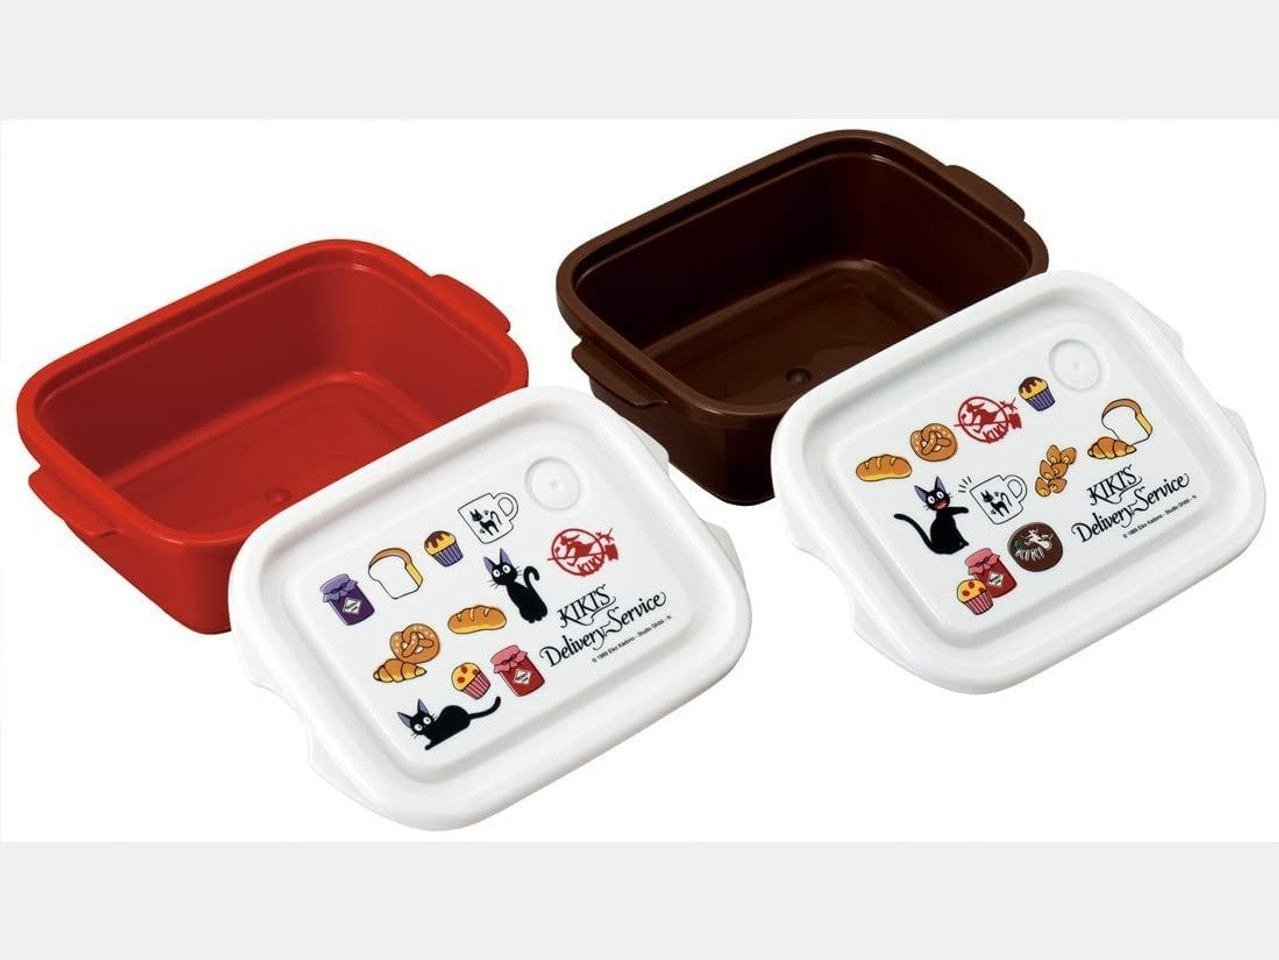 Skater Kiki's Delivery Service Bakery Sealed Container 2pcs Set 500mlx2